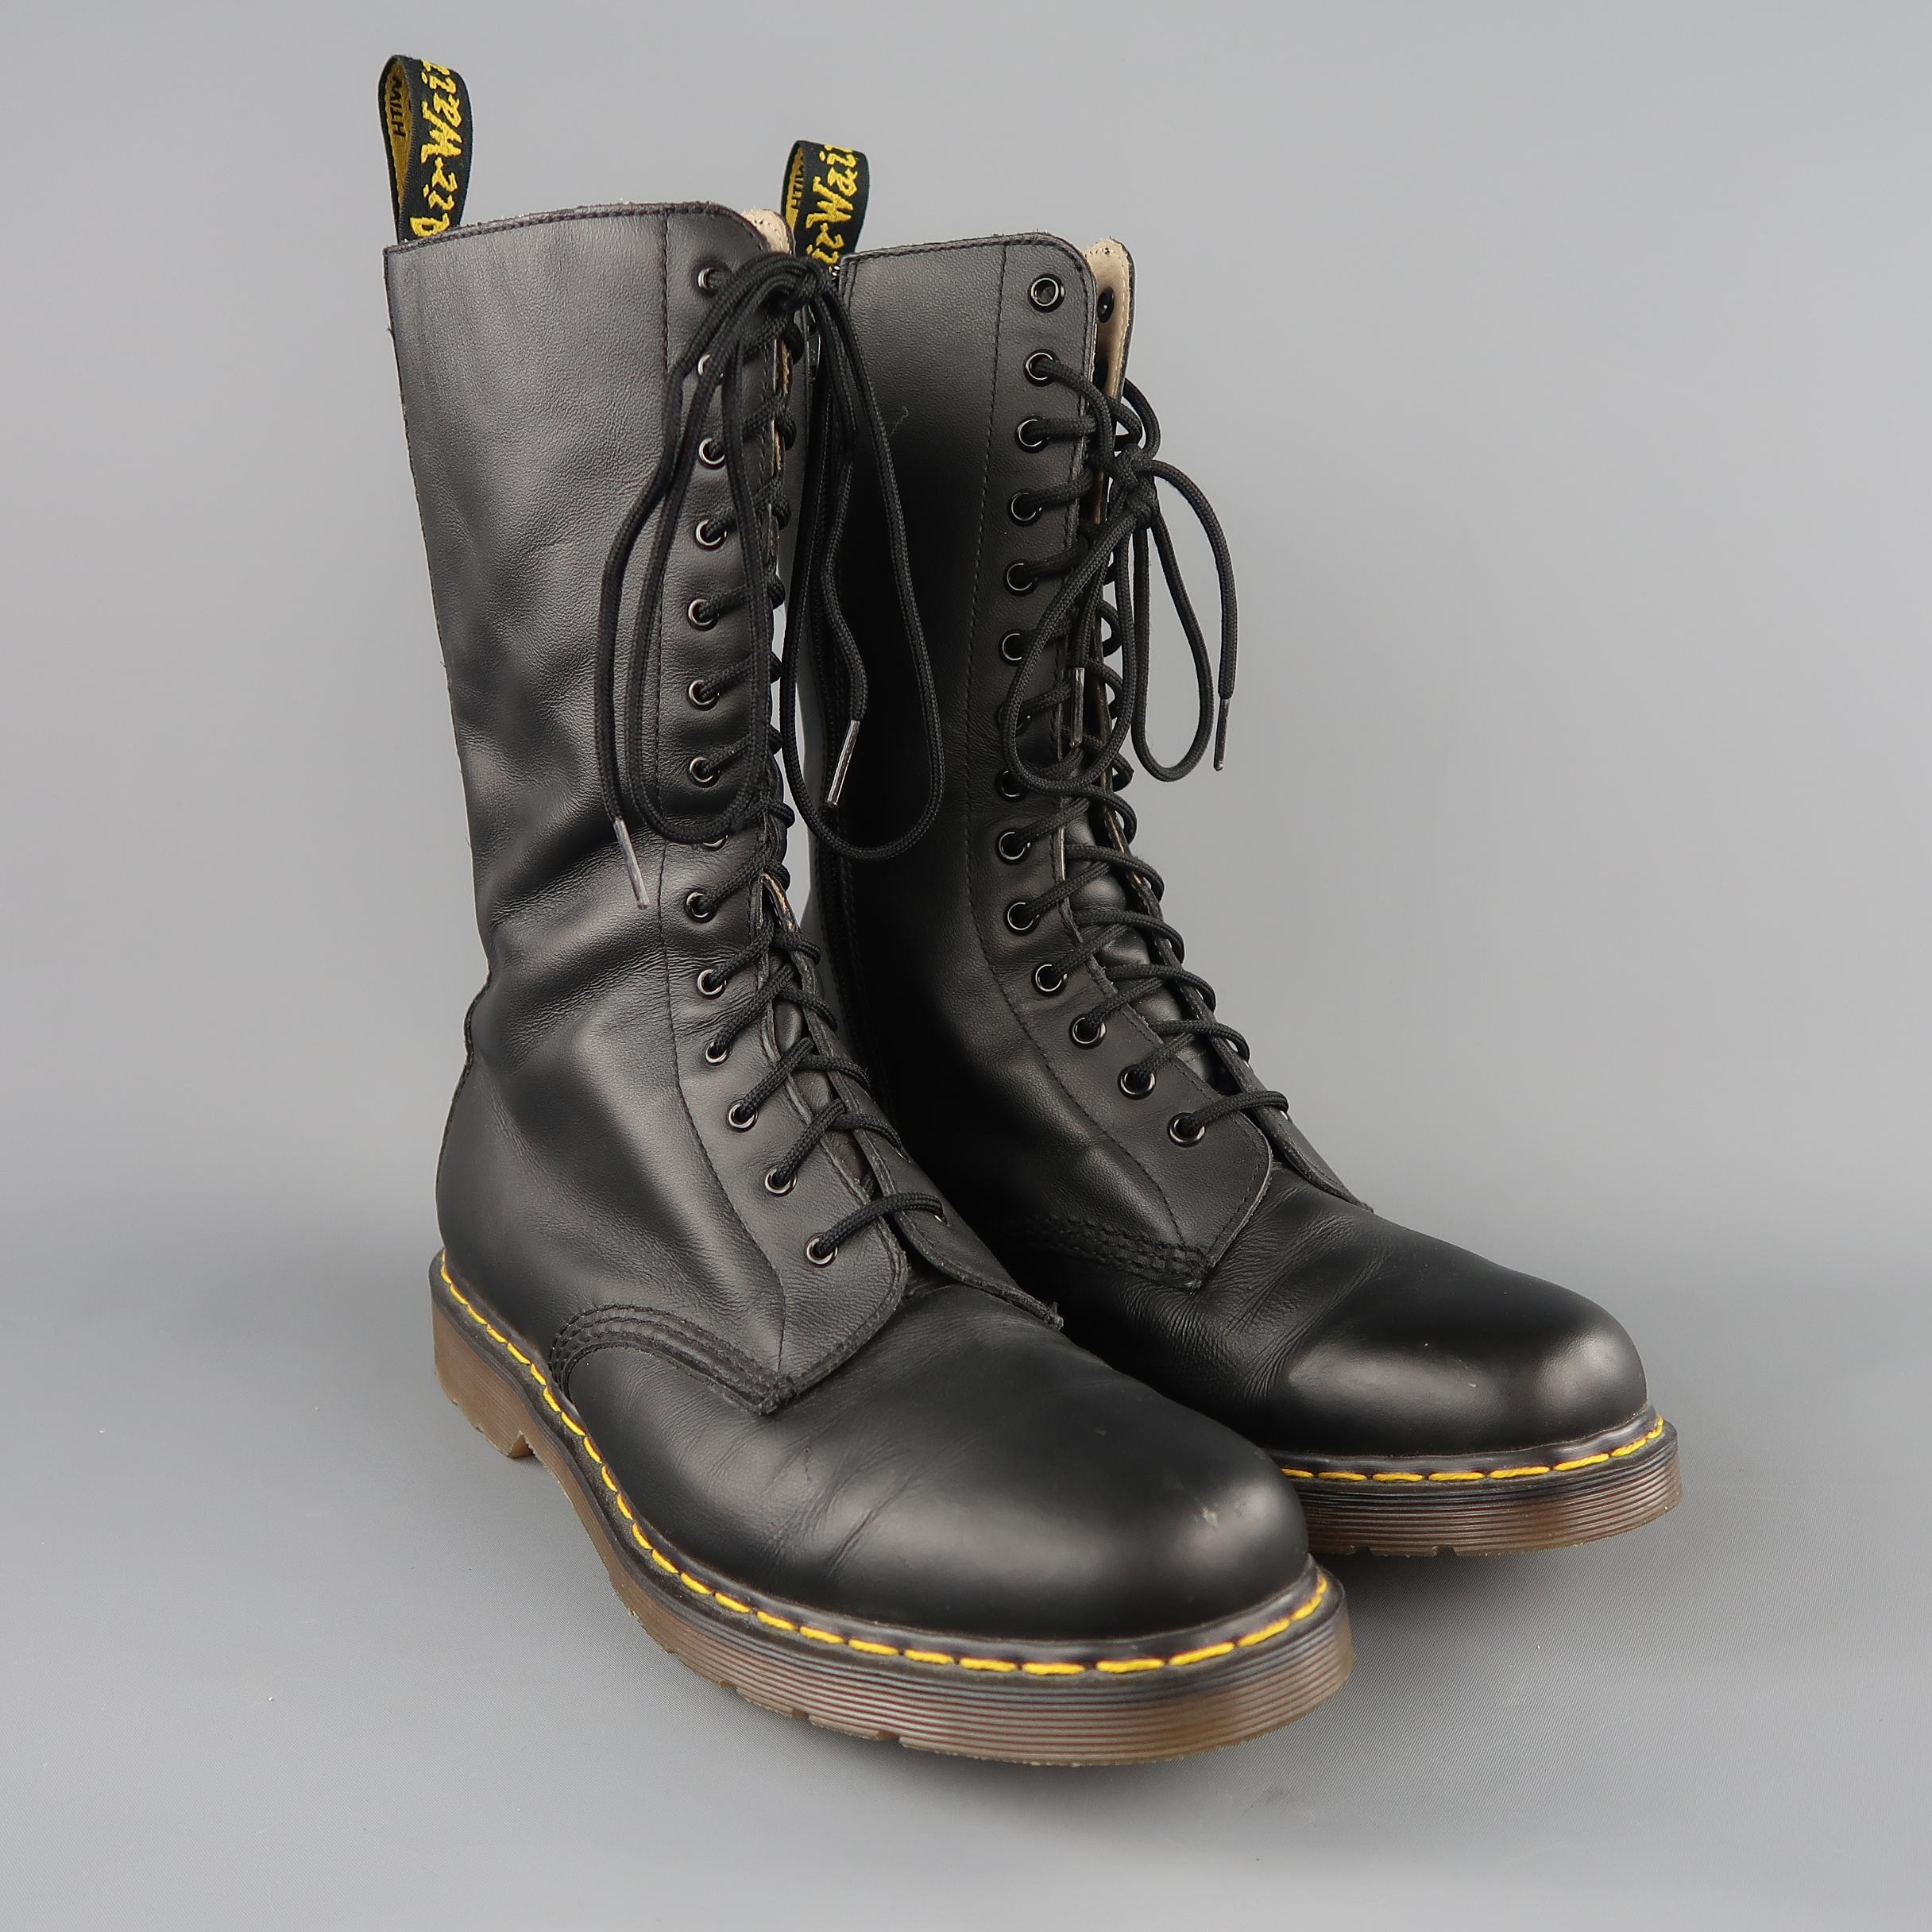 Limited Edition YOHJI YAMAMOTO for Dr. MARTENS calf high combat boots come in matte smooth leather with a 14 eyelet lace up front and inner zip closure. Wear throughout.
 
Good Pre-Owned Condition.
Marked: US 11
 
Measurements:
 
Outsole: 12.5 x 4.5